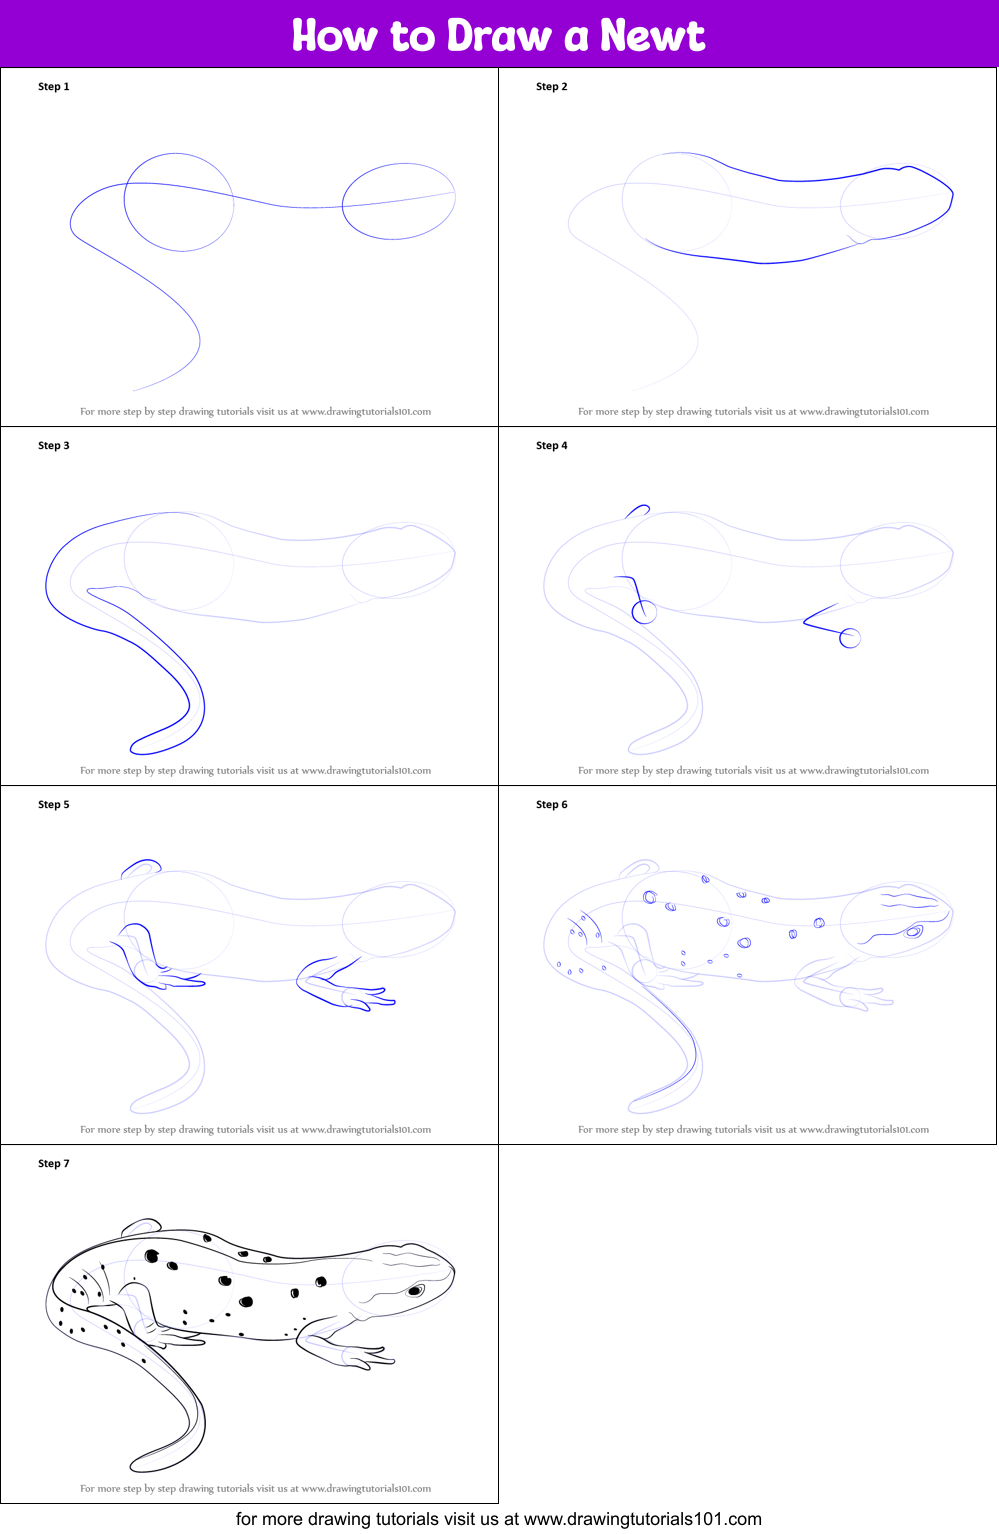 How to Draw a Newt printable step by step drawing sheet